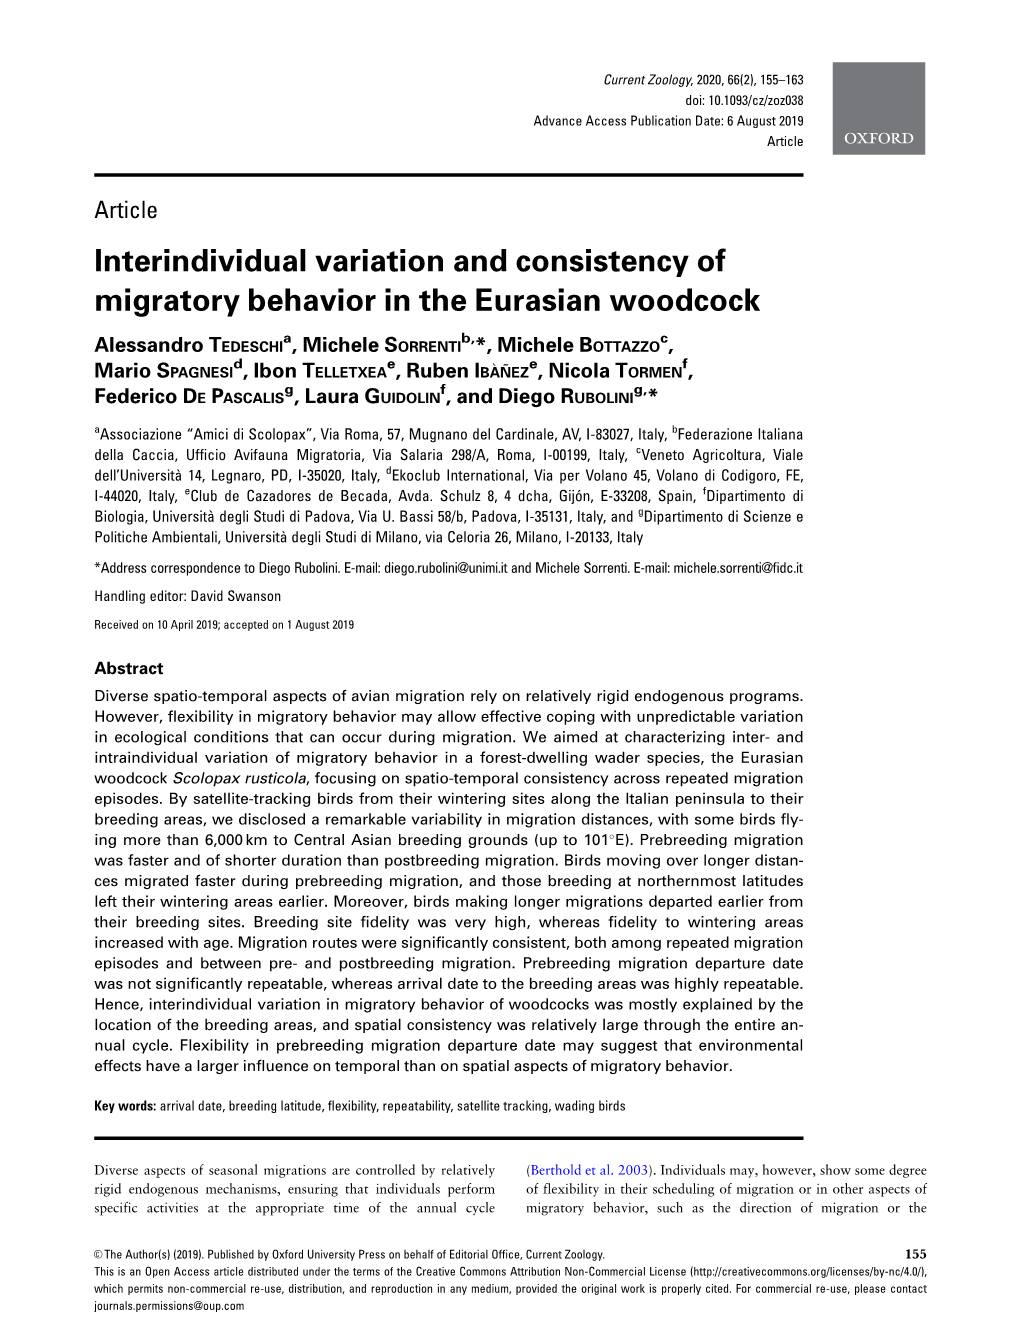 Interindividual Variation and Consistency of Migratory Behavior in the Eurasian Woodcock